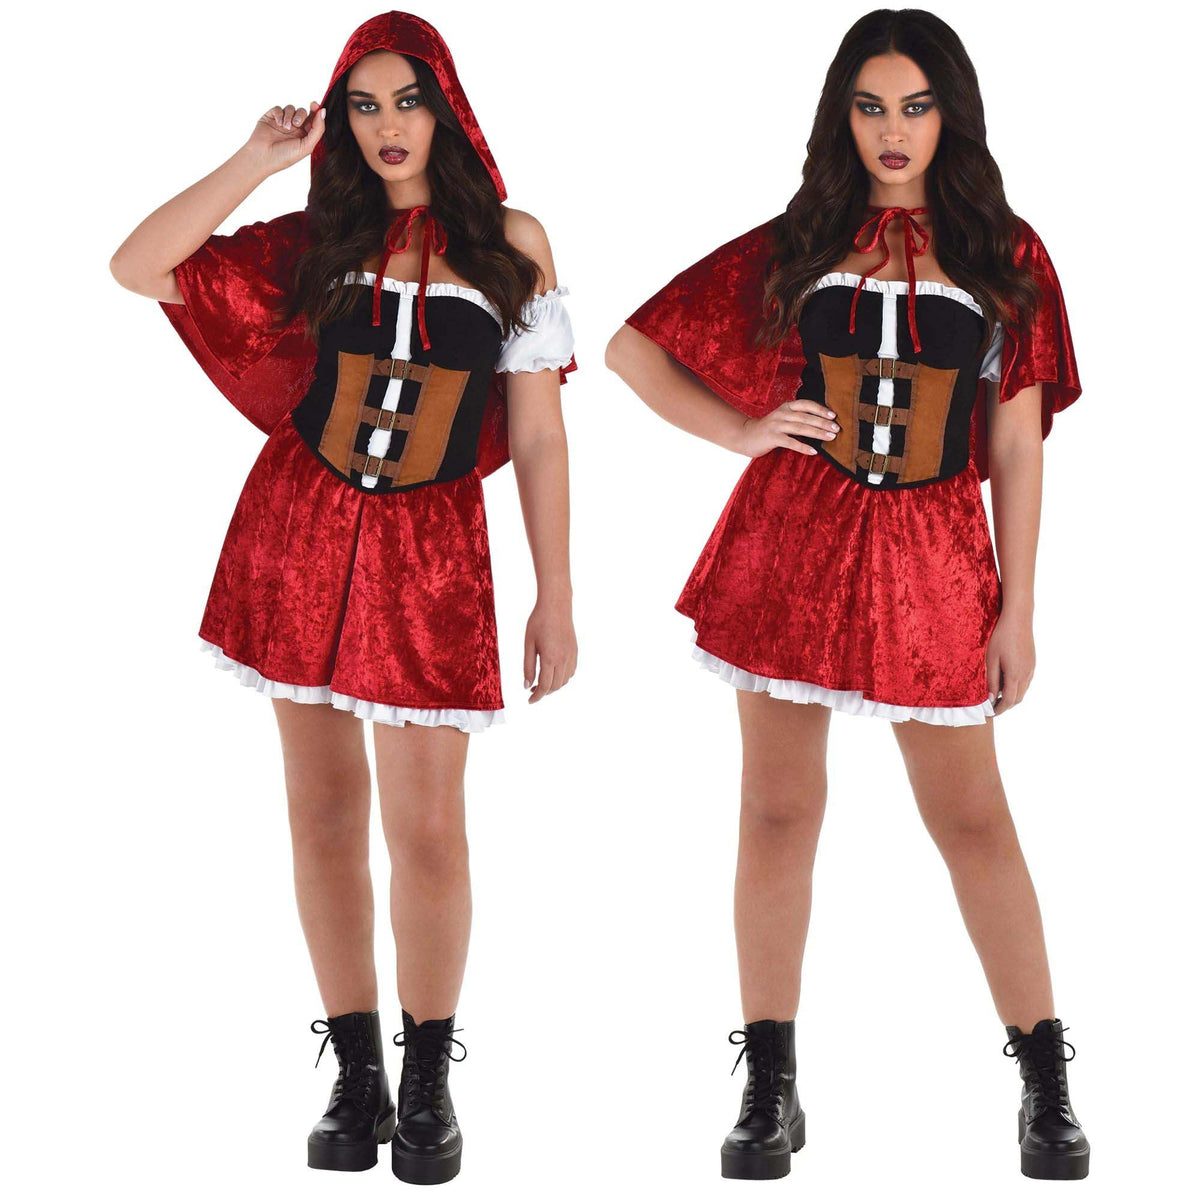 HALLOWEEN COSTUME CO. Costumes Rebel Red Riding Hood for Adults, Red Dress and Cape